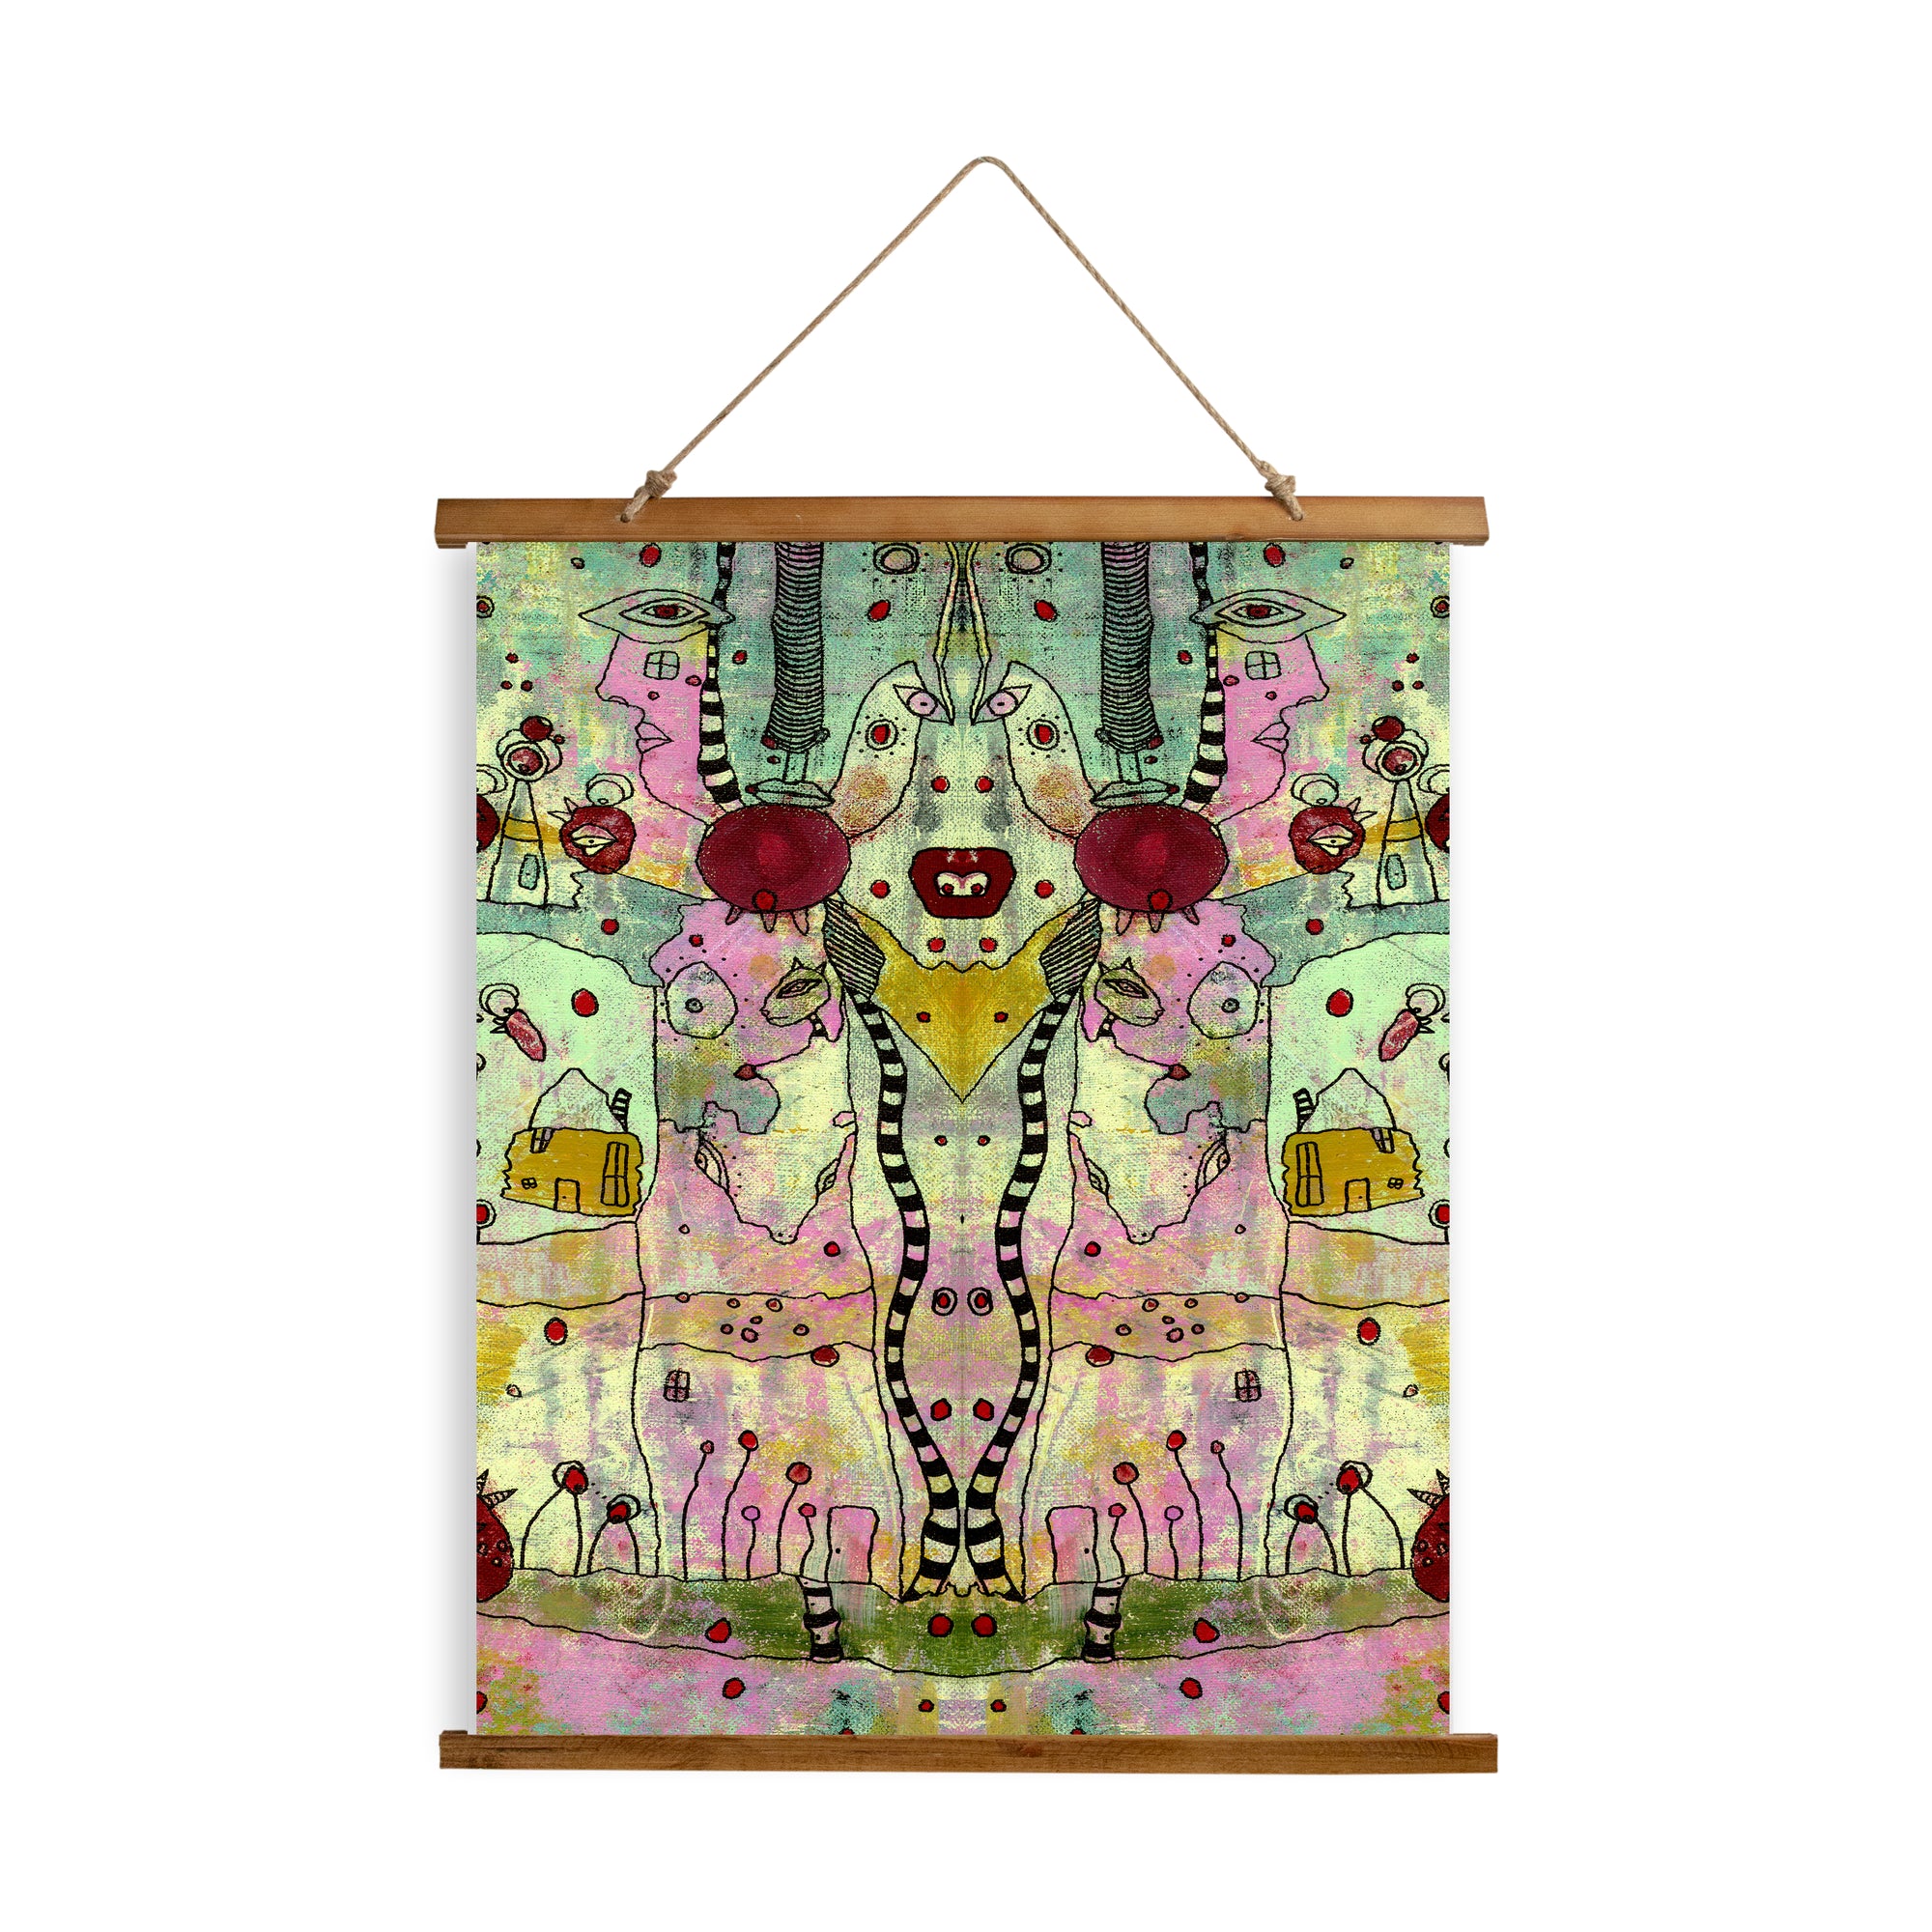 Whimsical Wood Slat Tapestry "Cut it out"